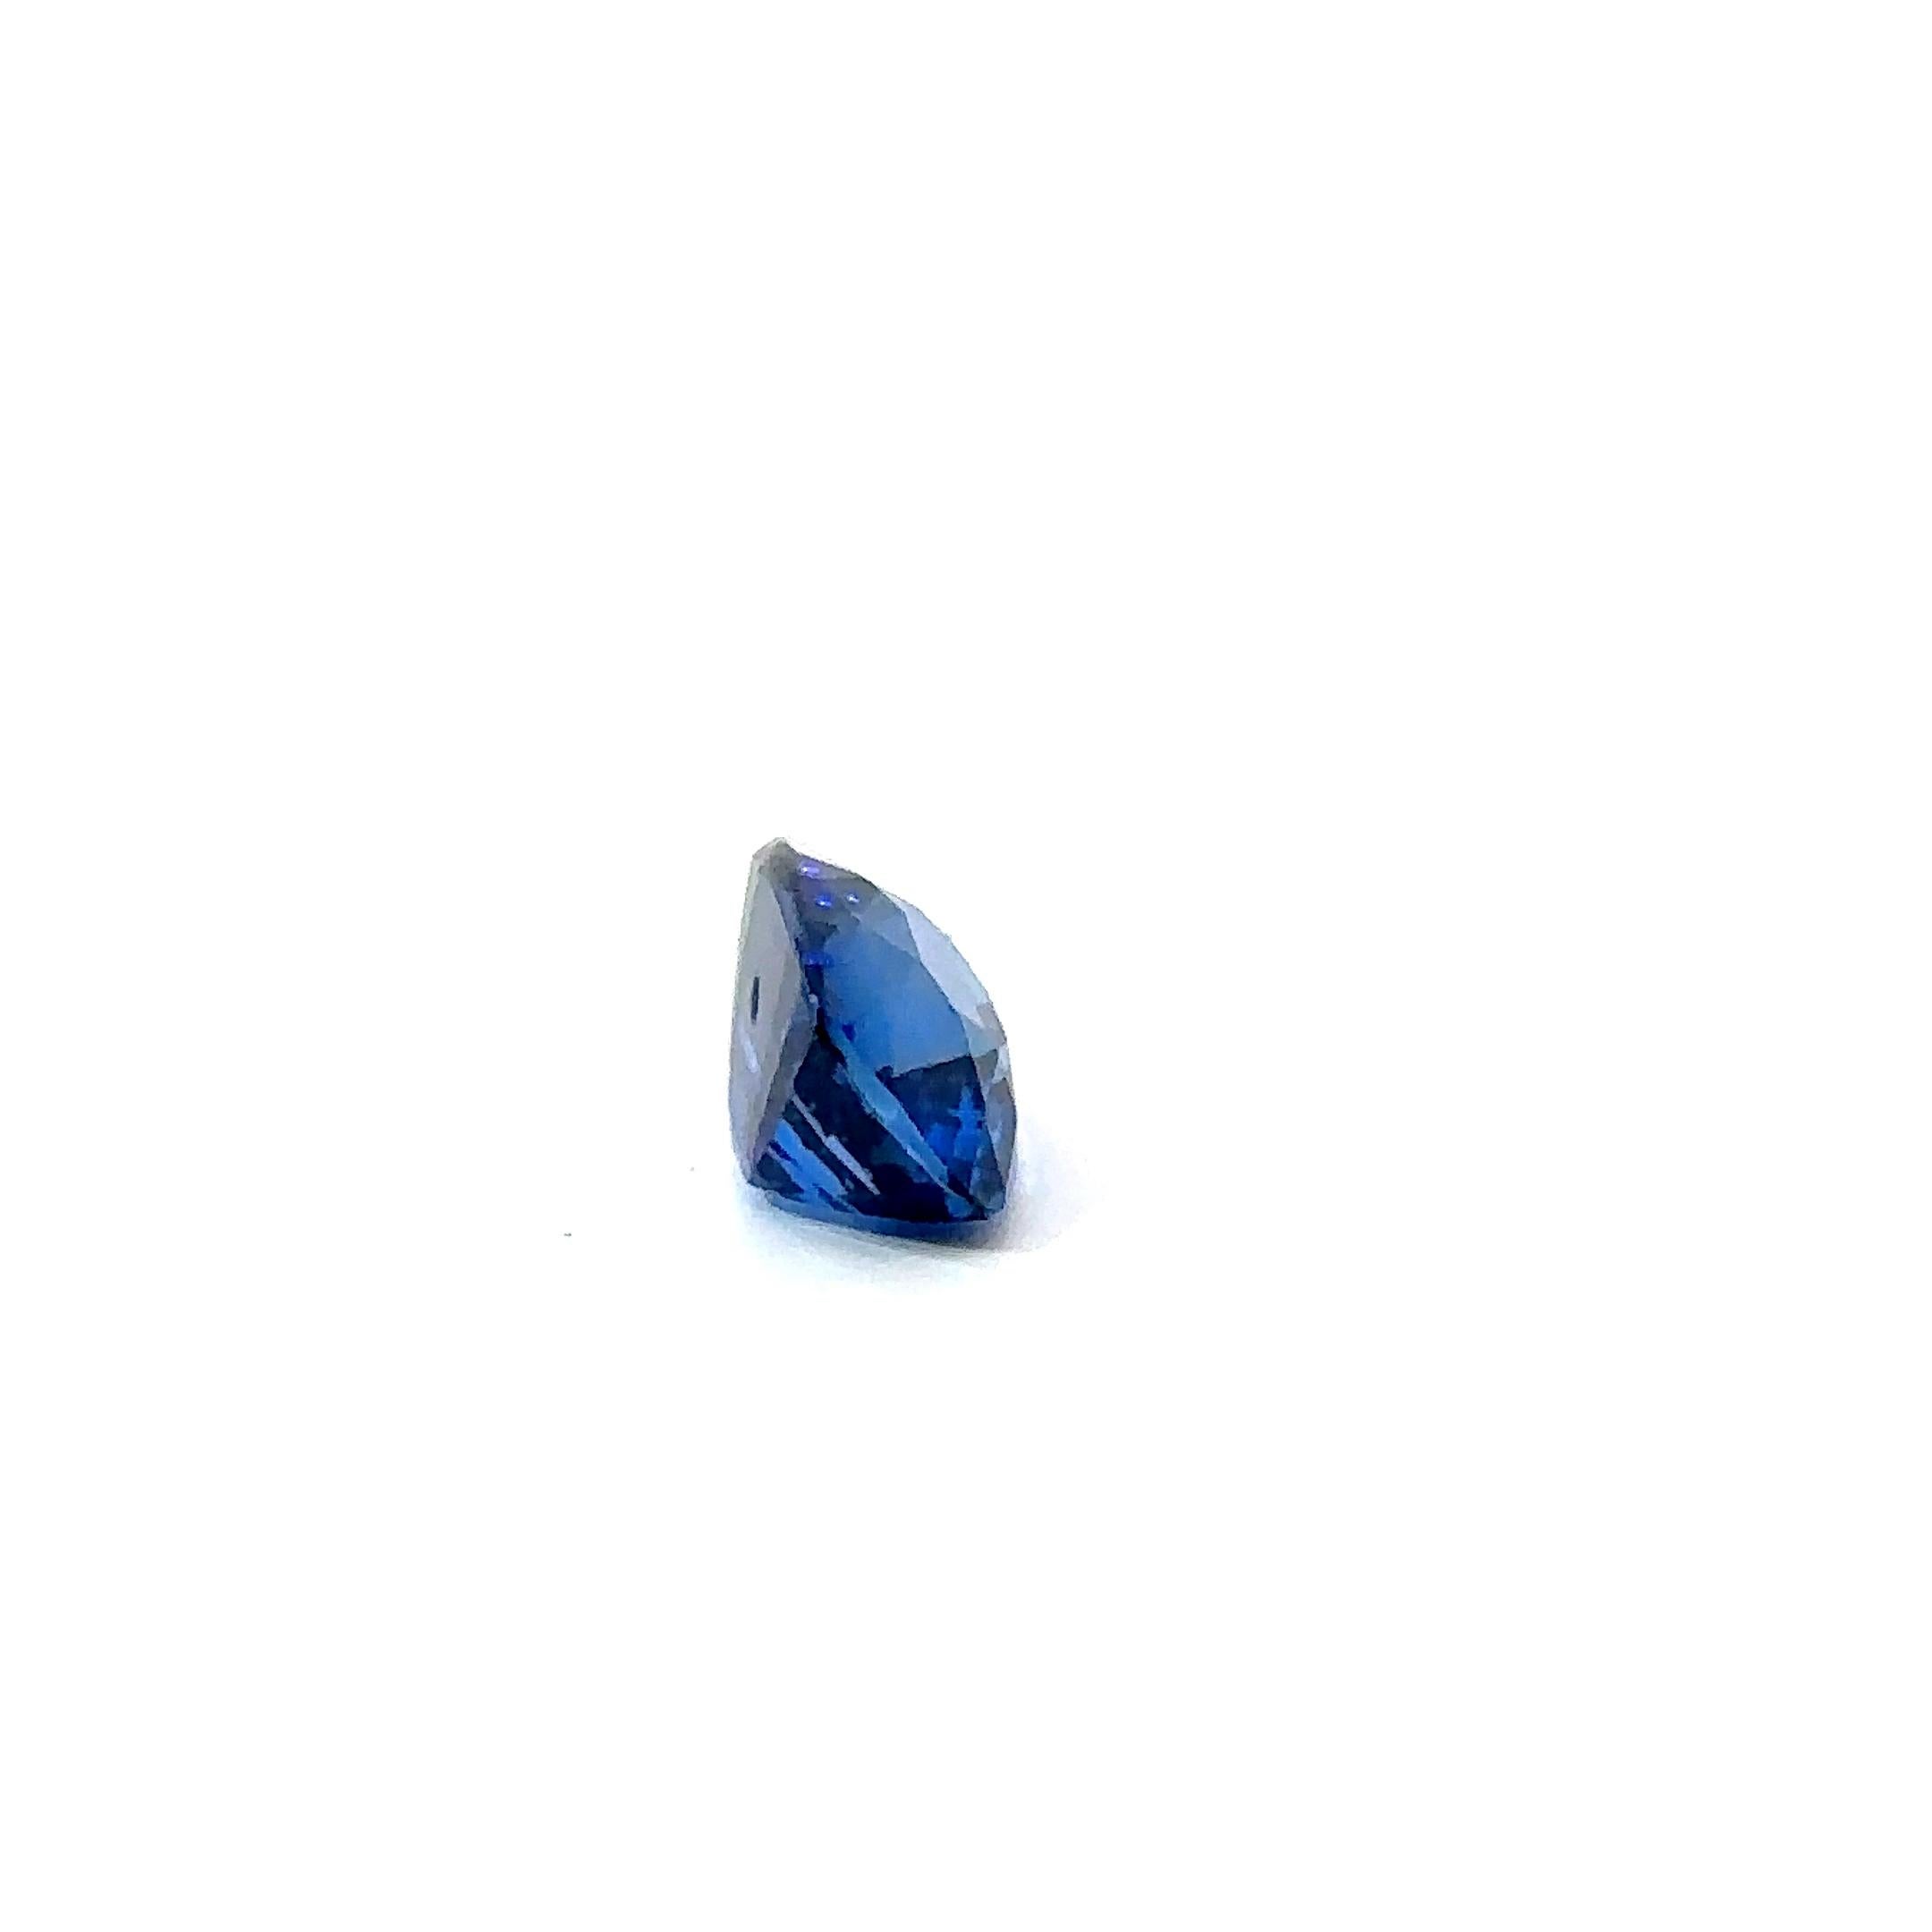 Artisan AIGS Certified 5.05 Carat Blue Sapphire ( Heated) For Sale